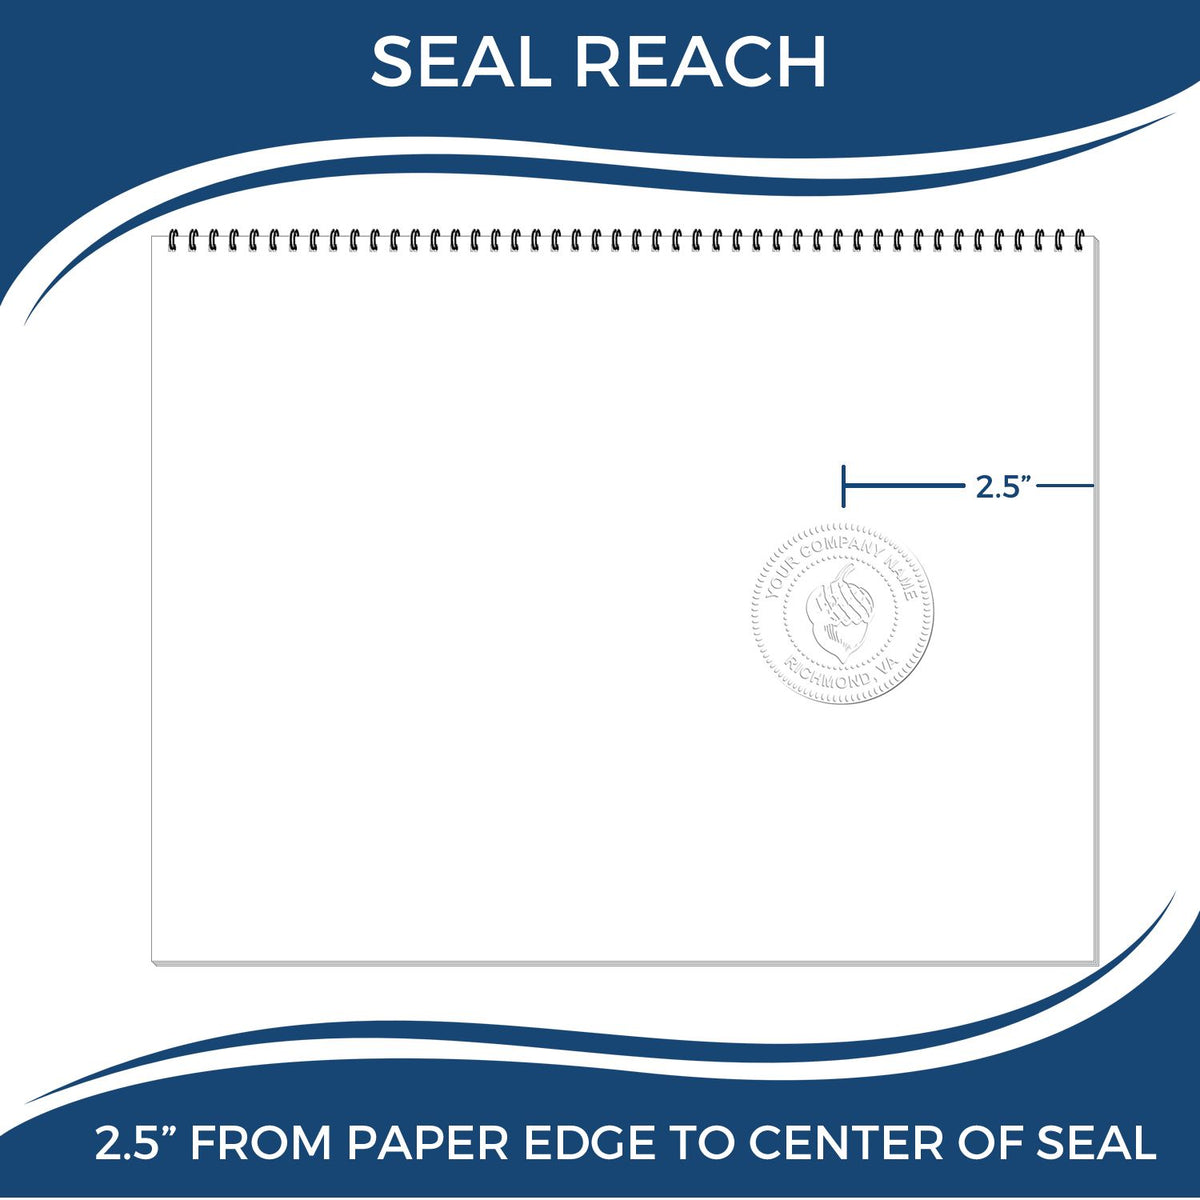 An infographic showing the seal reach which is represented by a ruler and a miniature seal image of the Long Reach Kentucky PE Seal